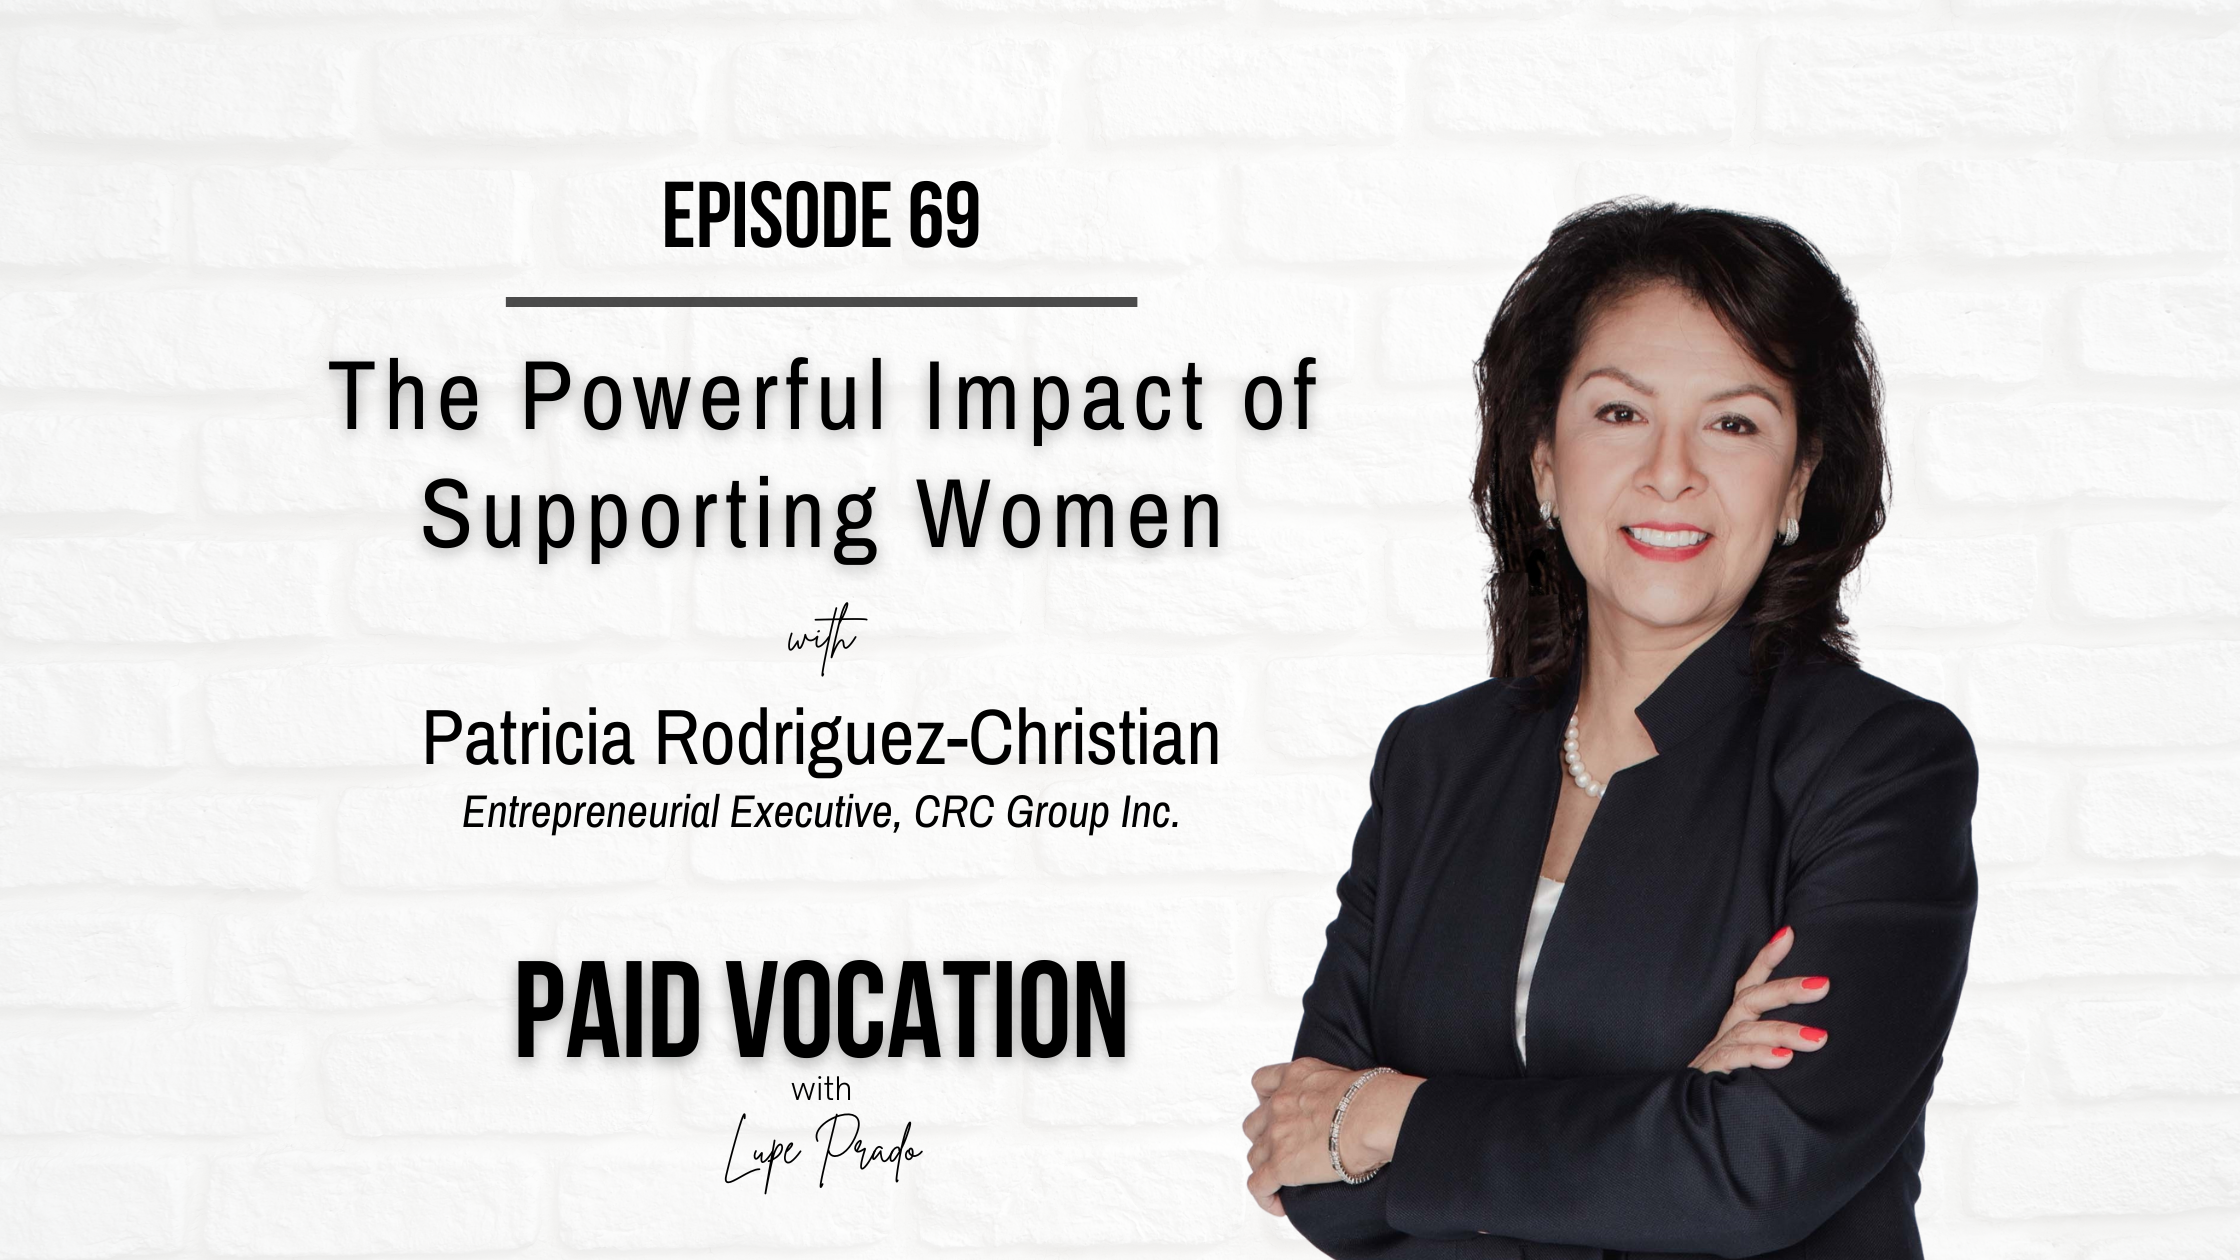 The Powerful Impact of Supporting Women with Patricia Rodriguez-Christian